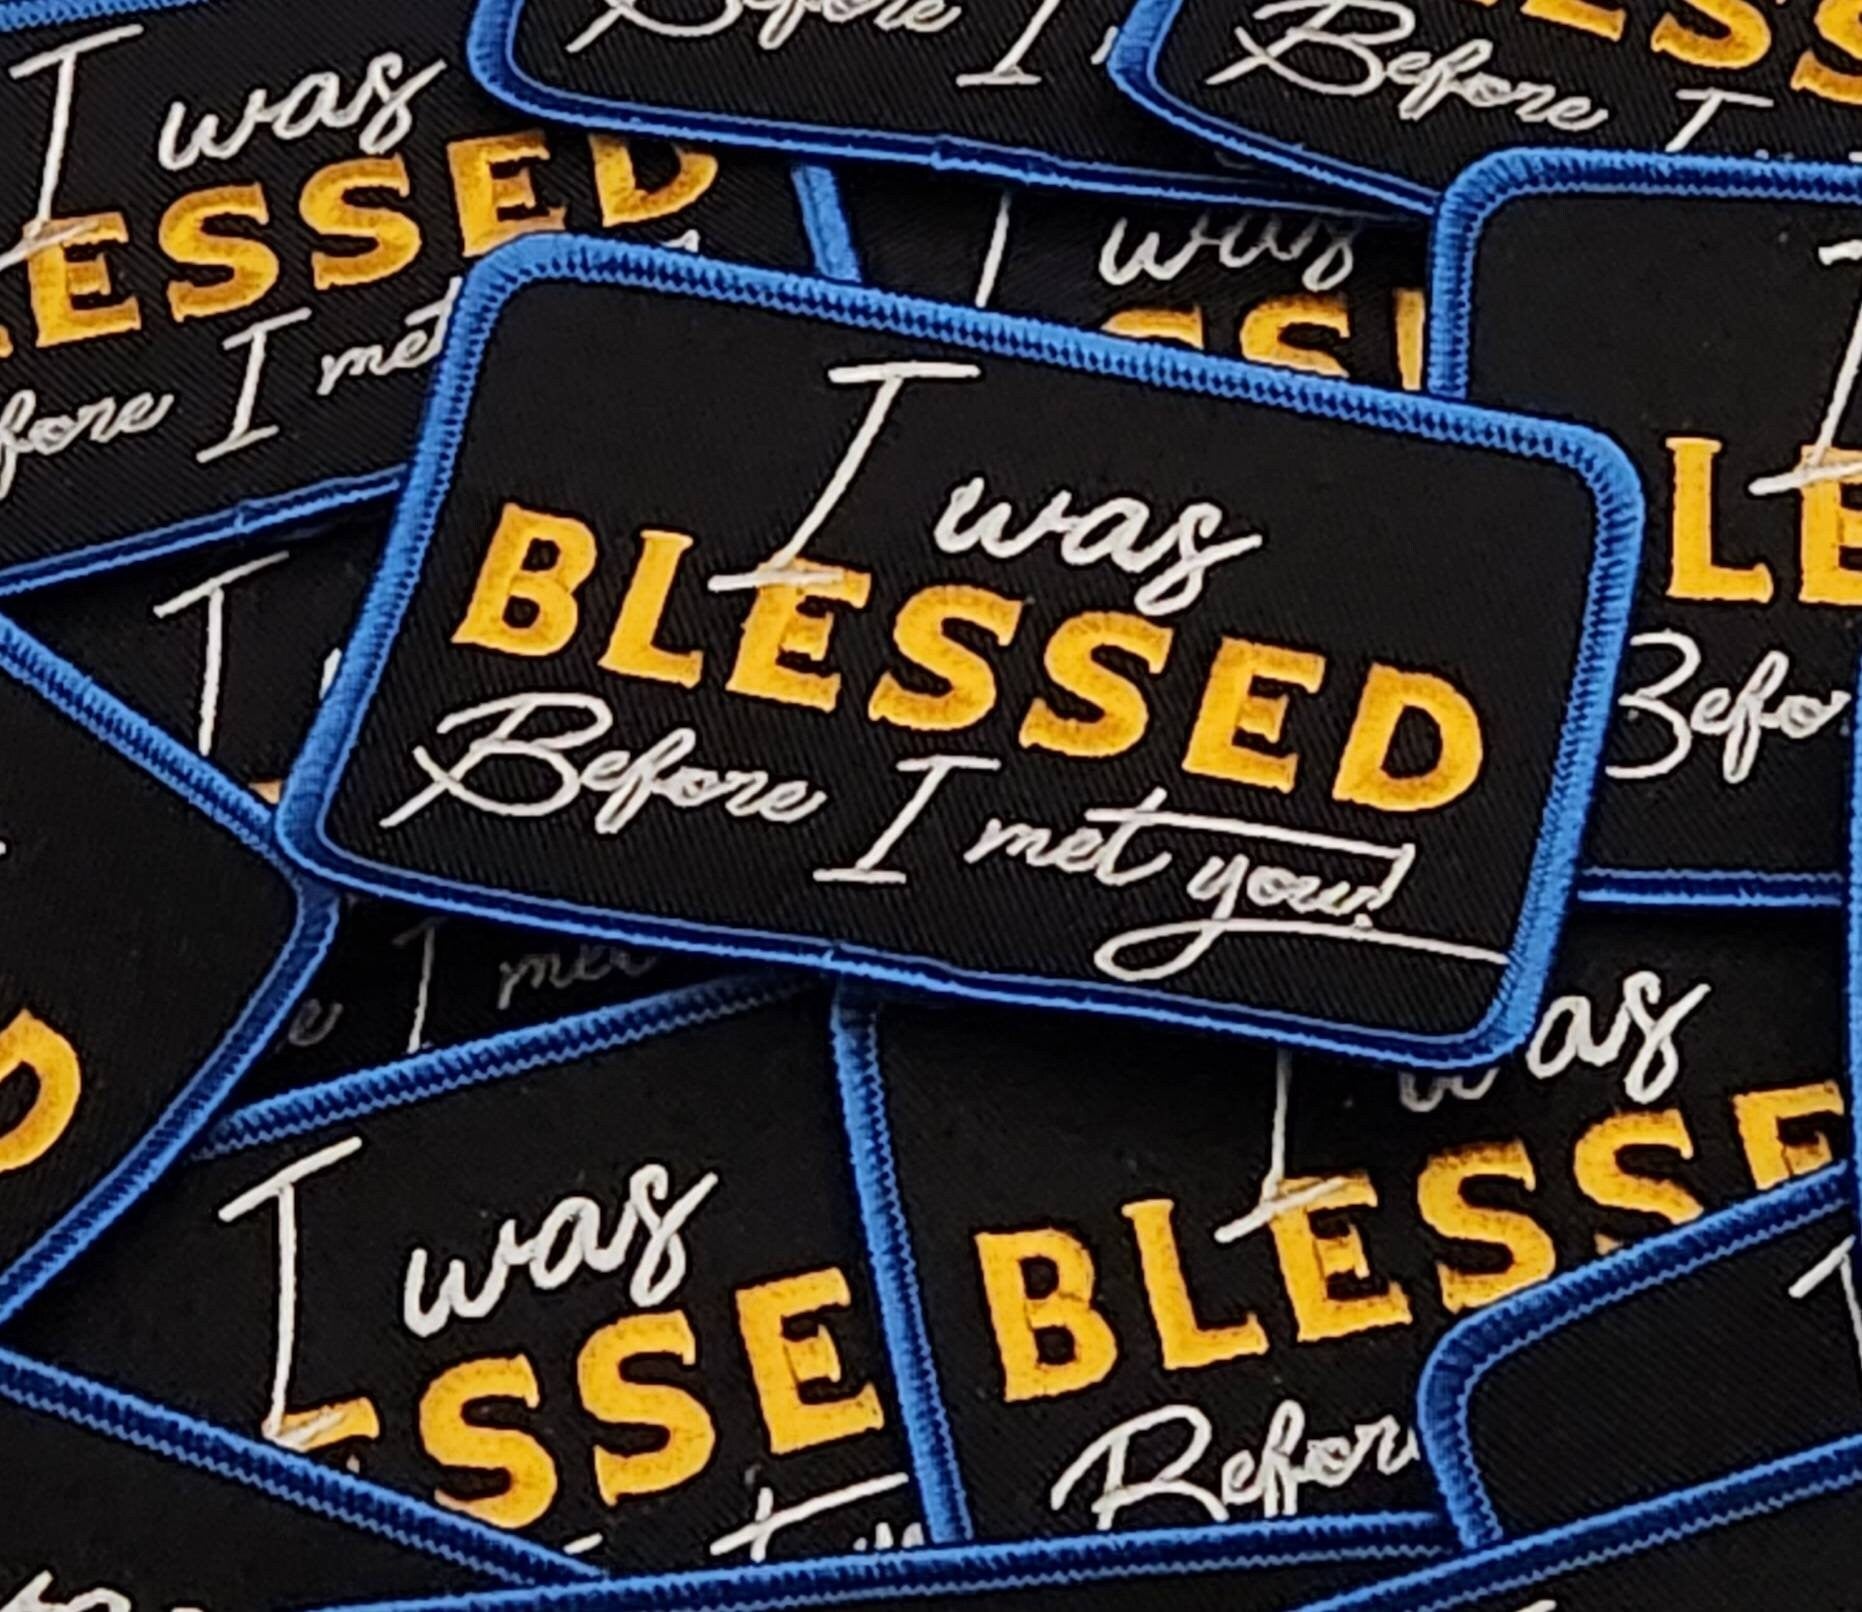 New, "I was Blessed Before I Met You!" 1-pc, Iron-on Embroidered Patch, Cool Patch for Clothing and Accessories; Size 4"x3", DIY Applique